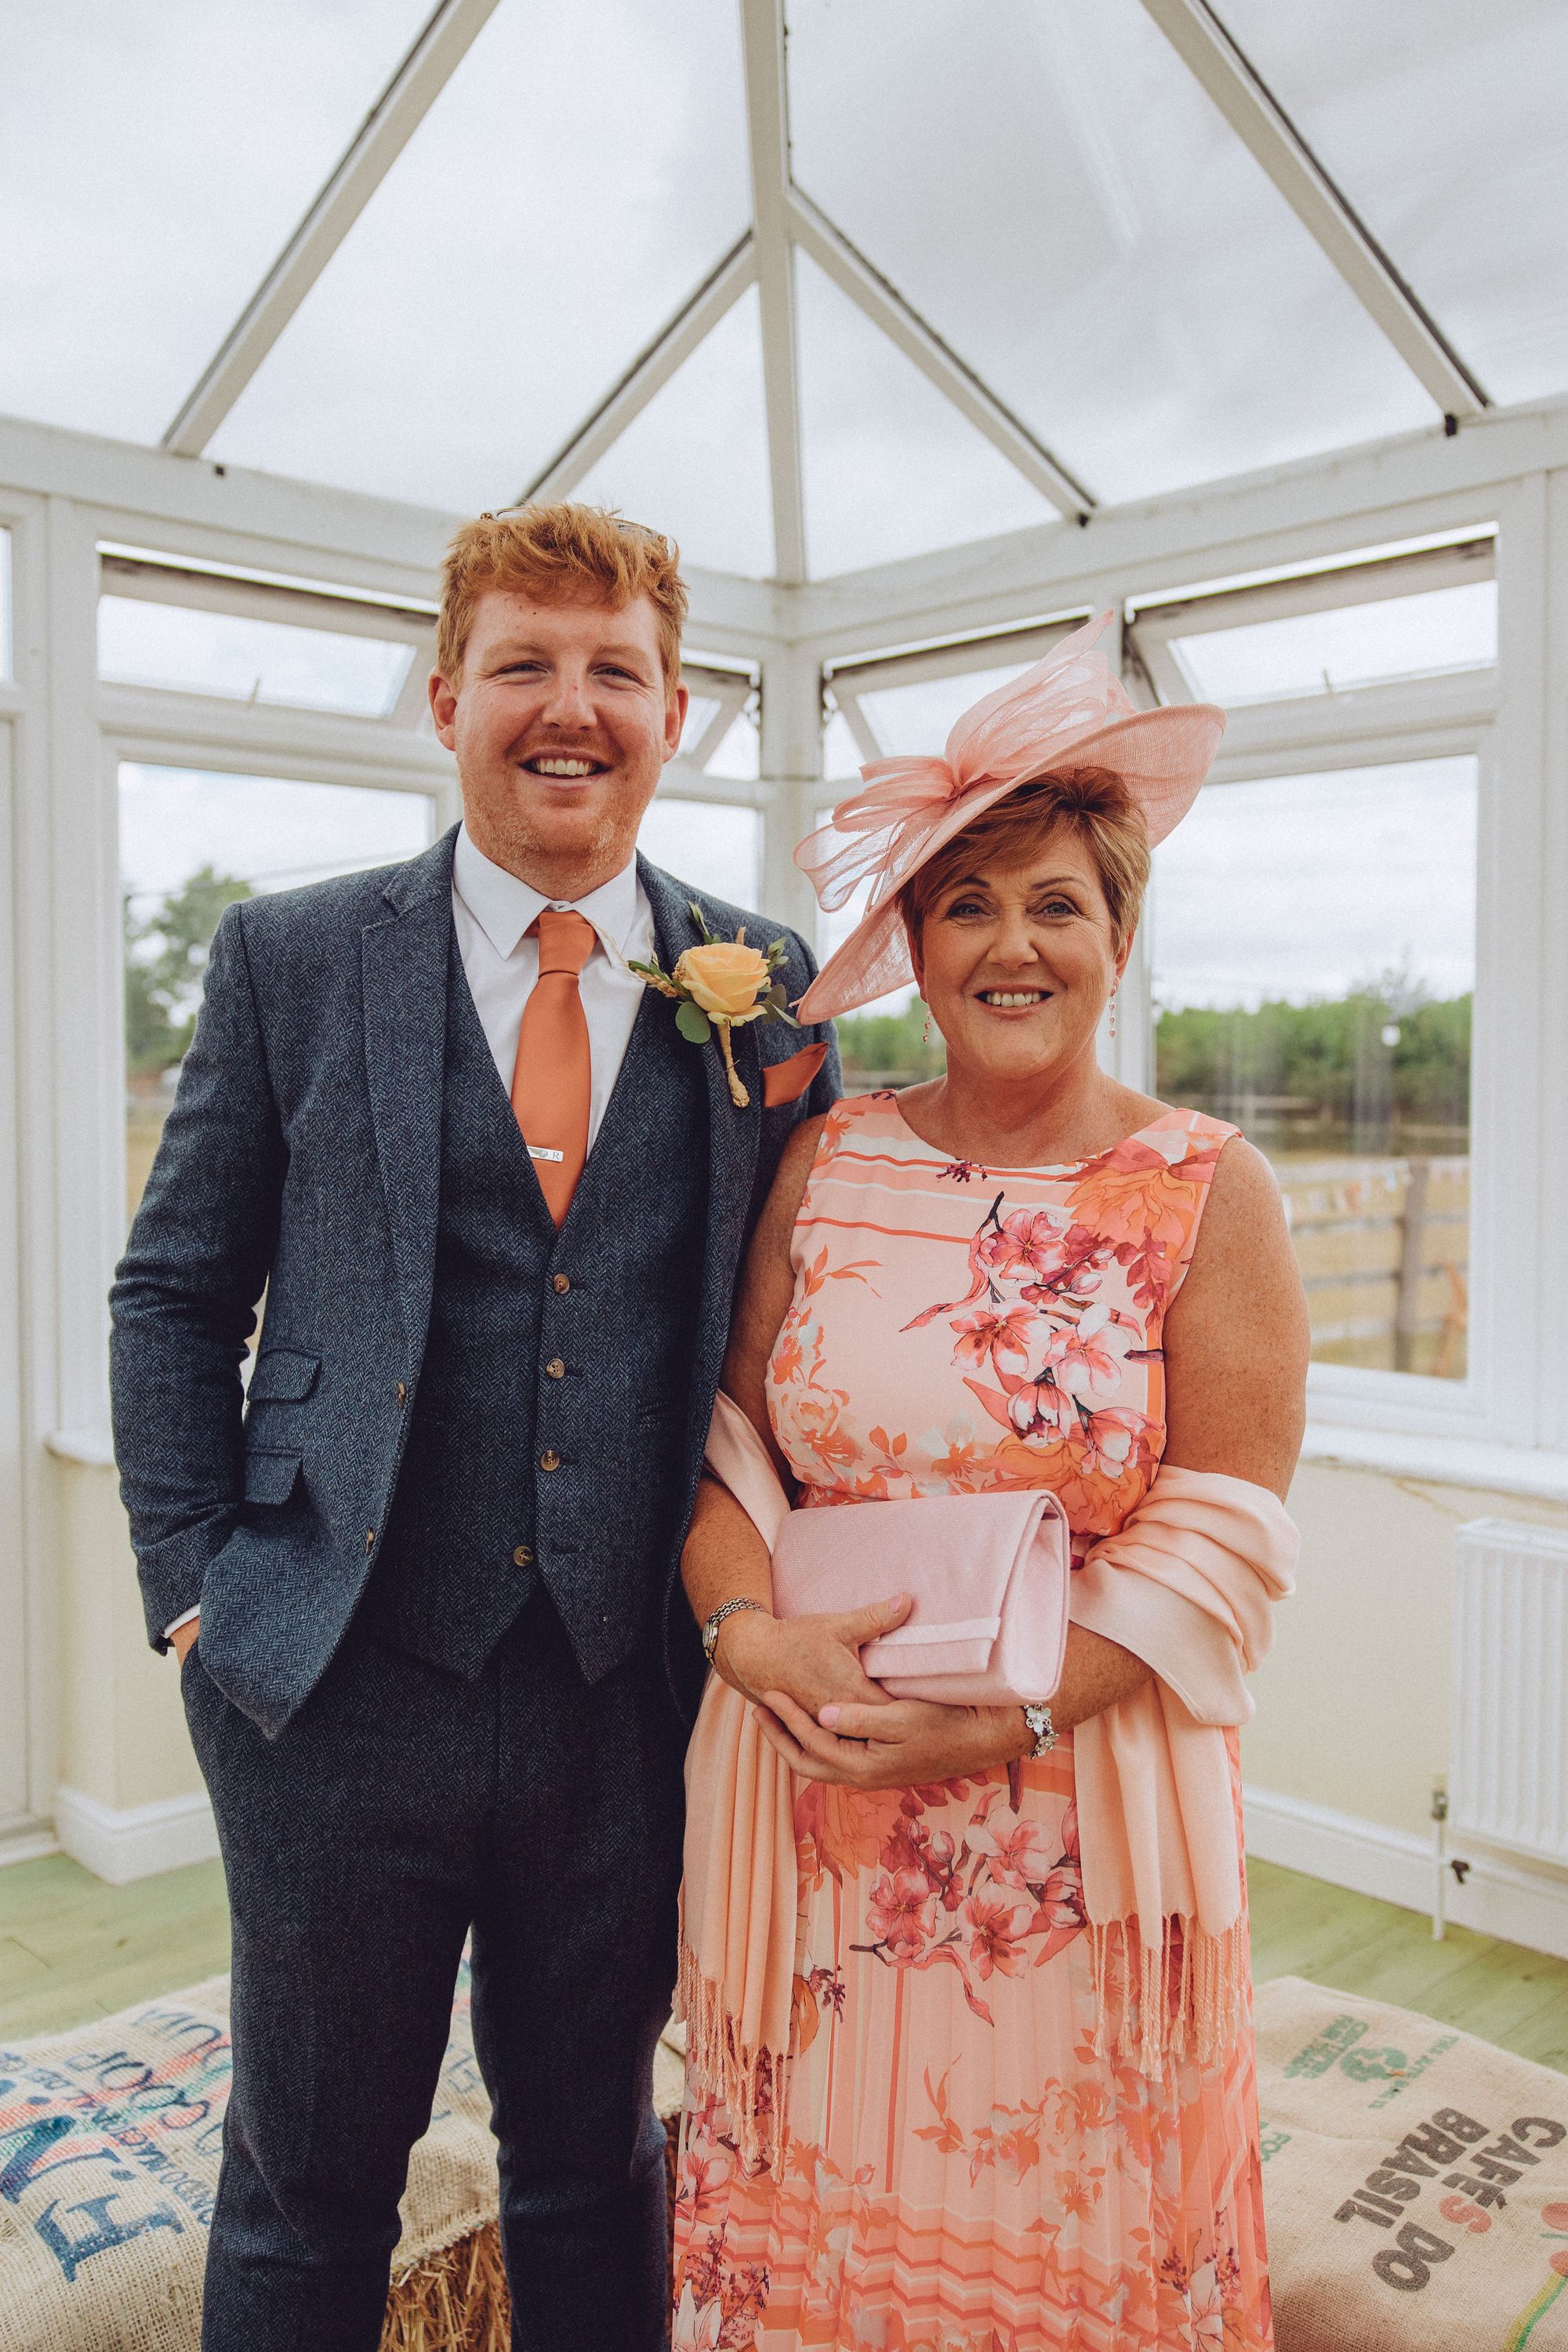 Dan posing with his Mum on the morning of his wedding, all smiles! Photo thanks to Fordtography.